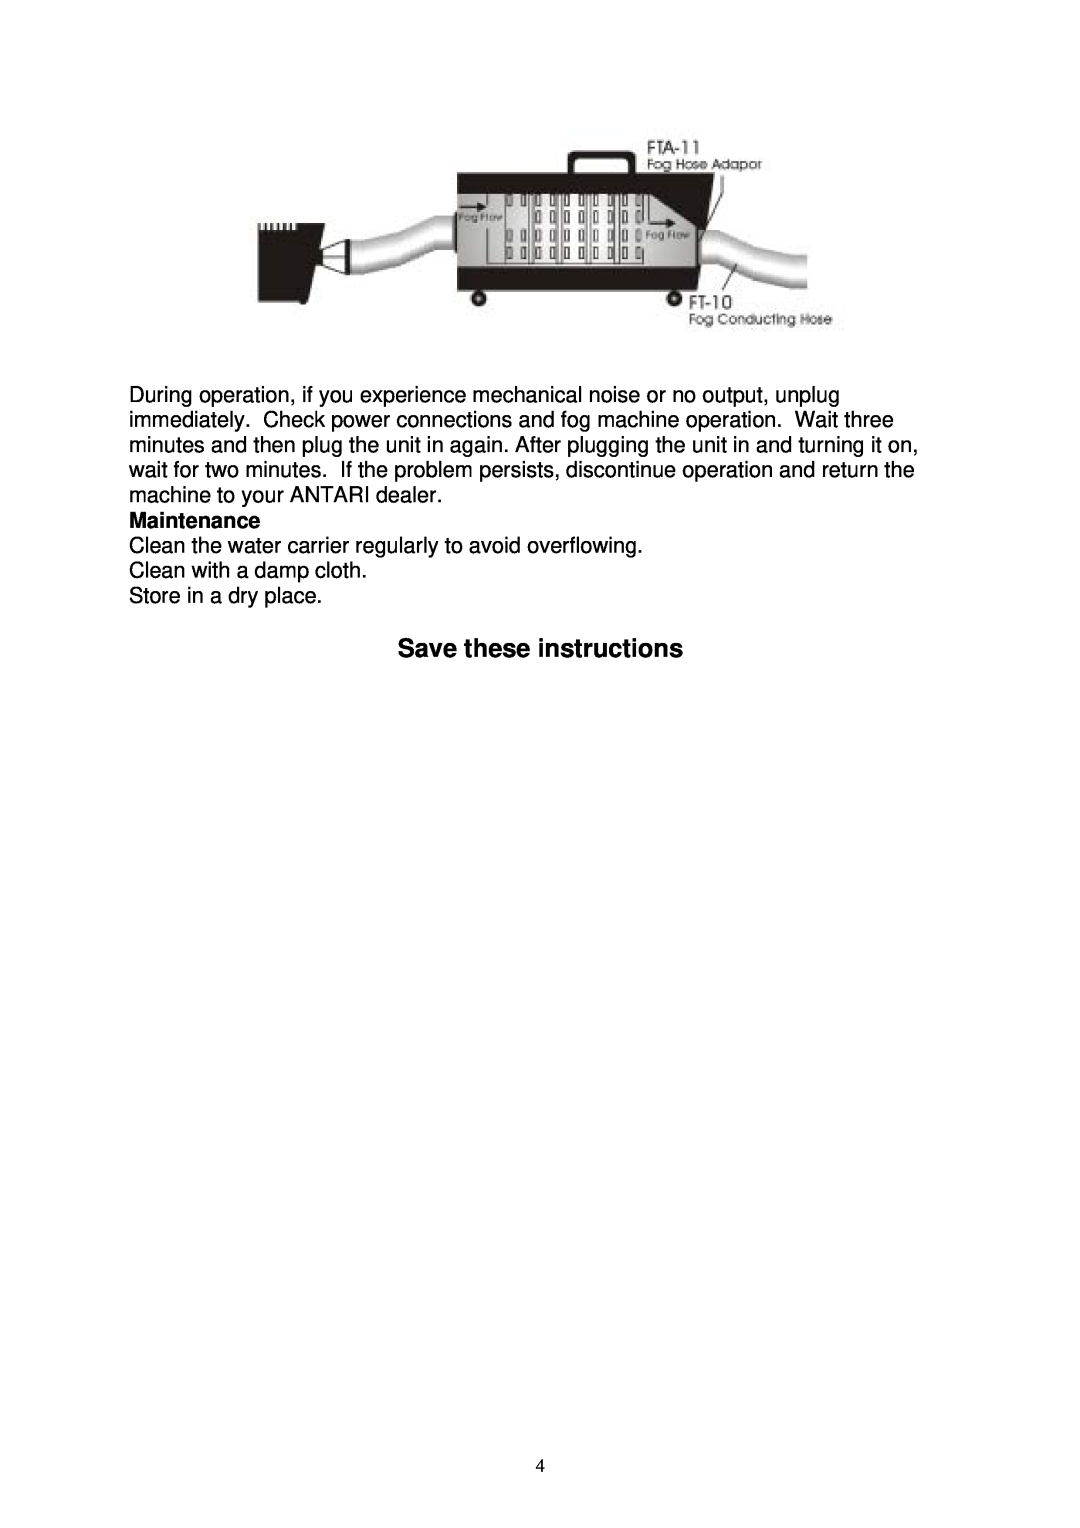 Antari Lighting and Effects DNG-100 user manual Save these instructions, Maintenance 